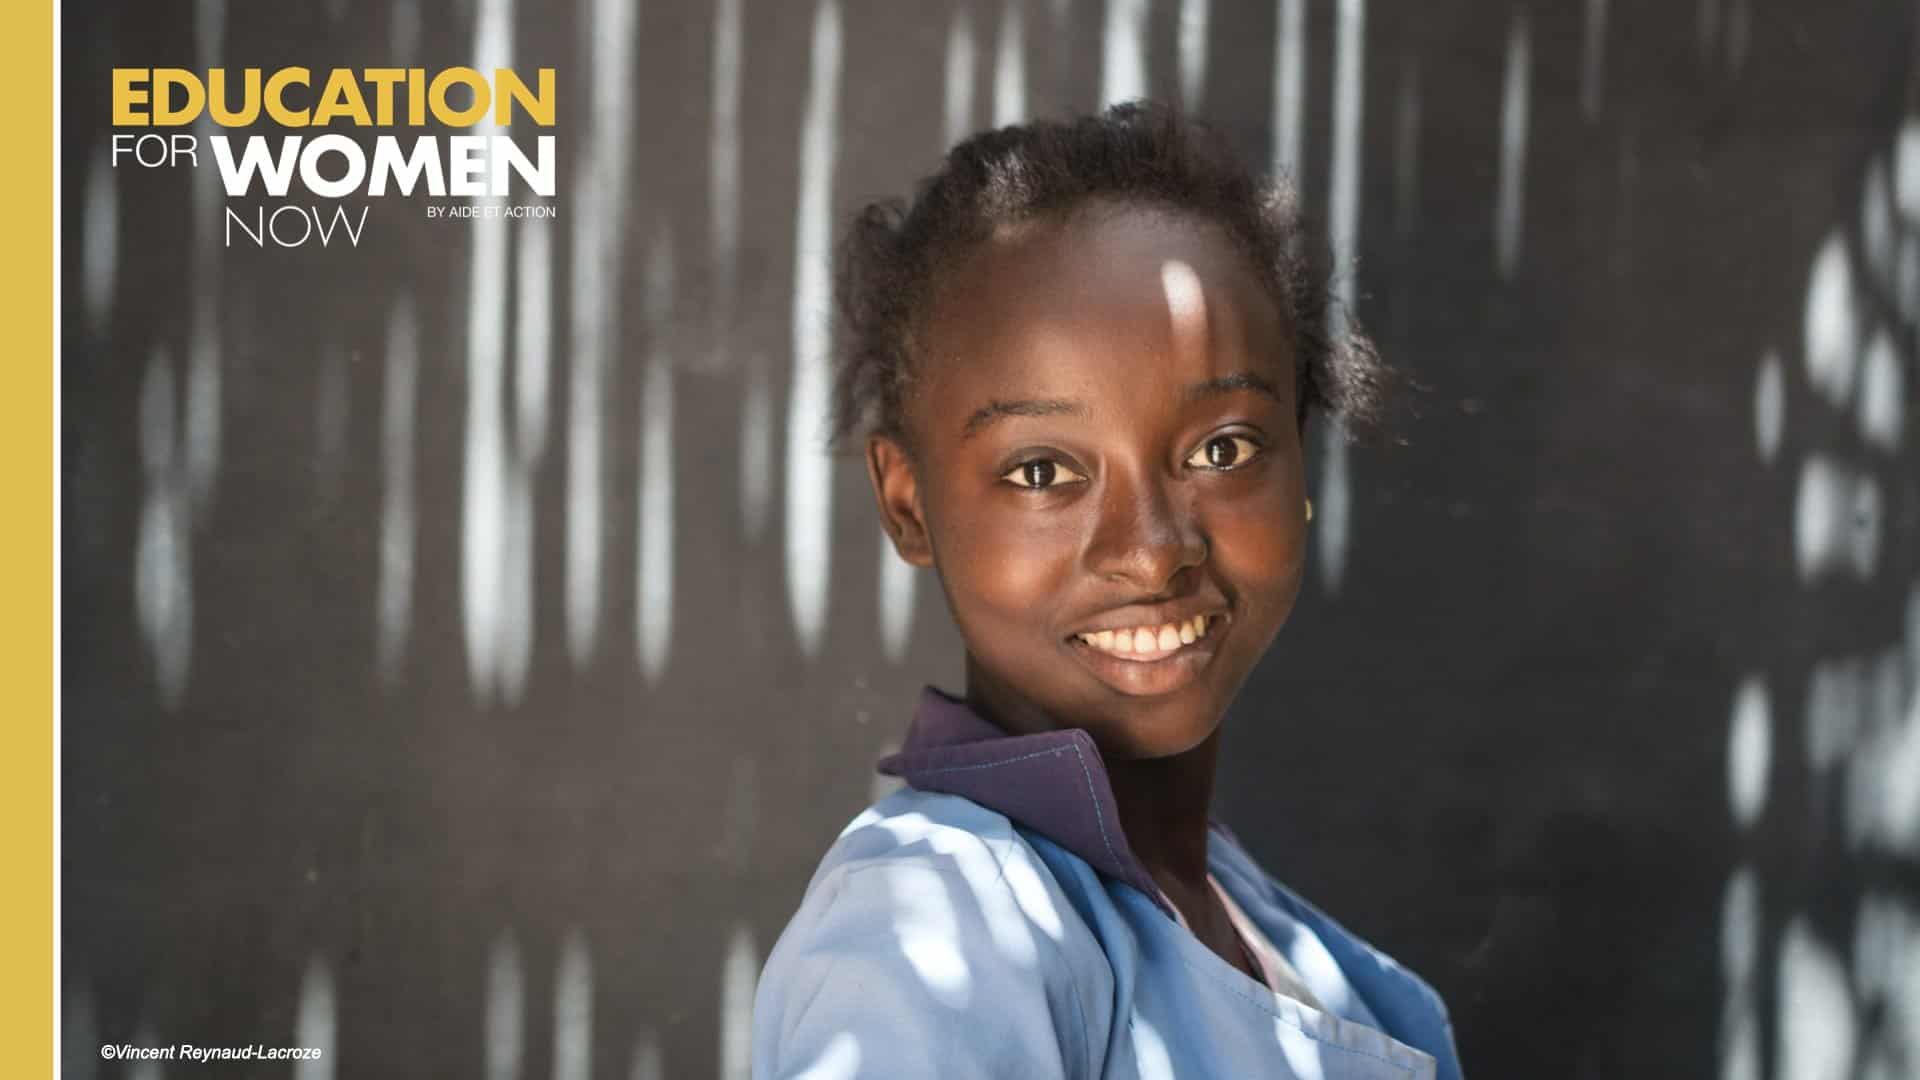 Education for Women Now campaign aims to provide access to education for 3 million women and girls worldwide